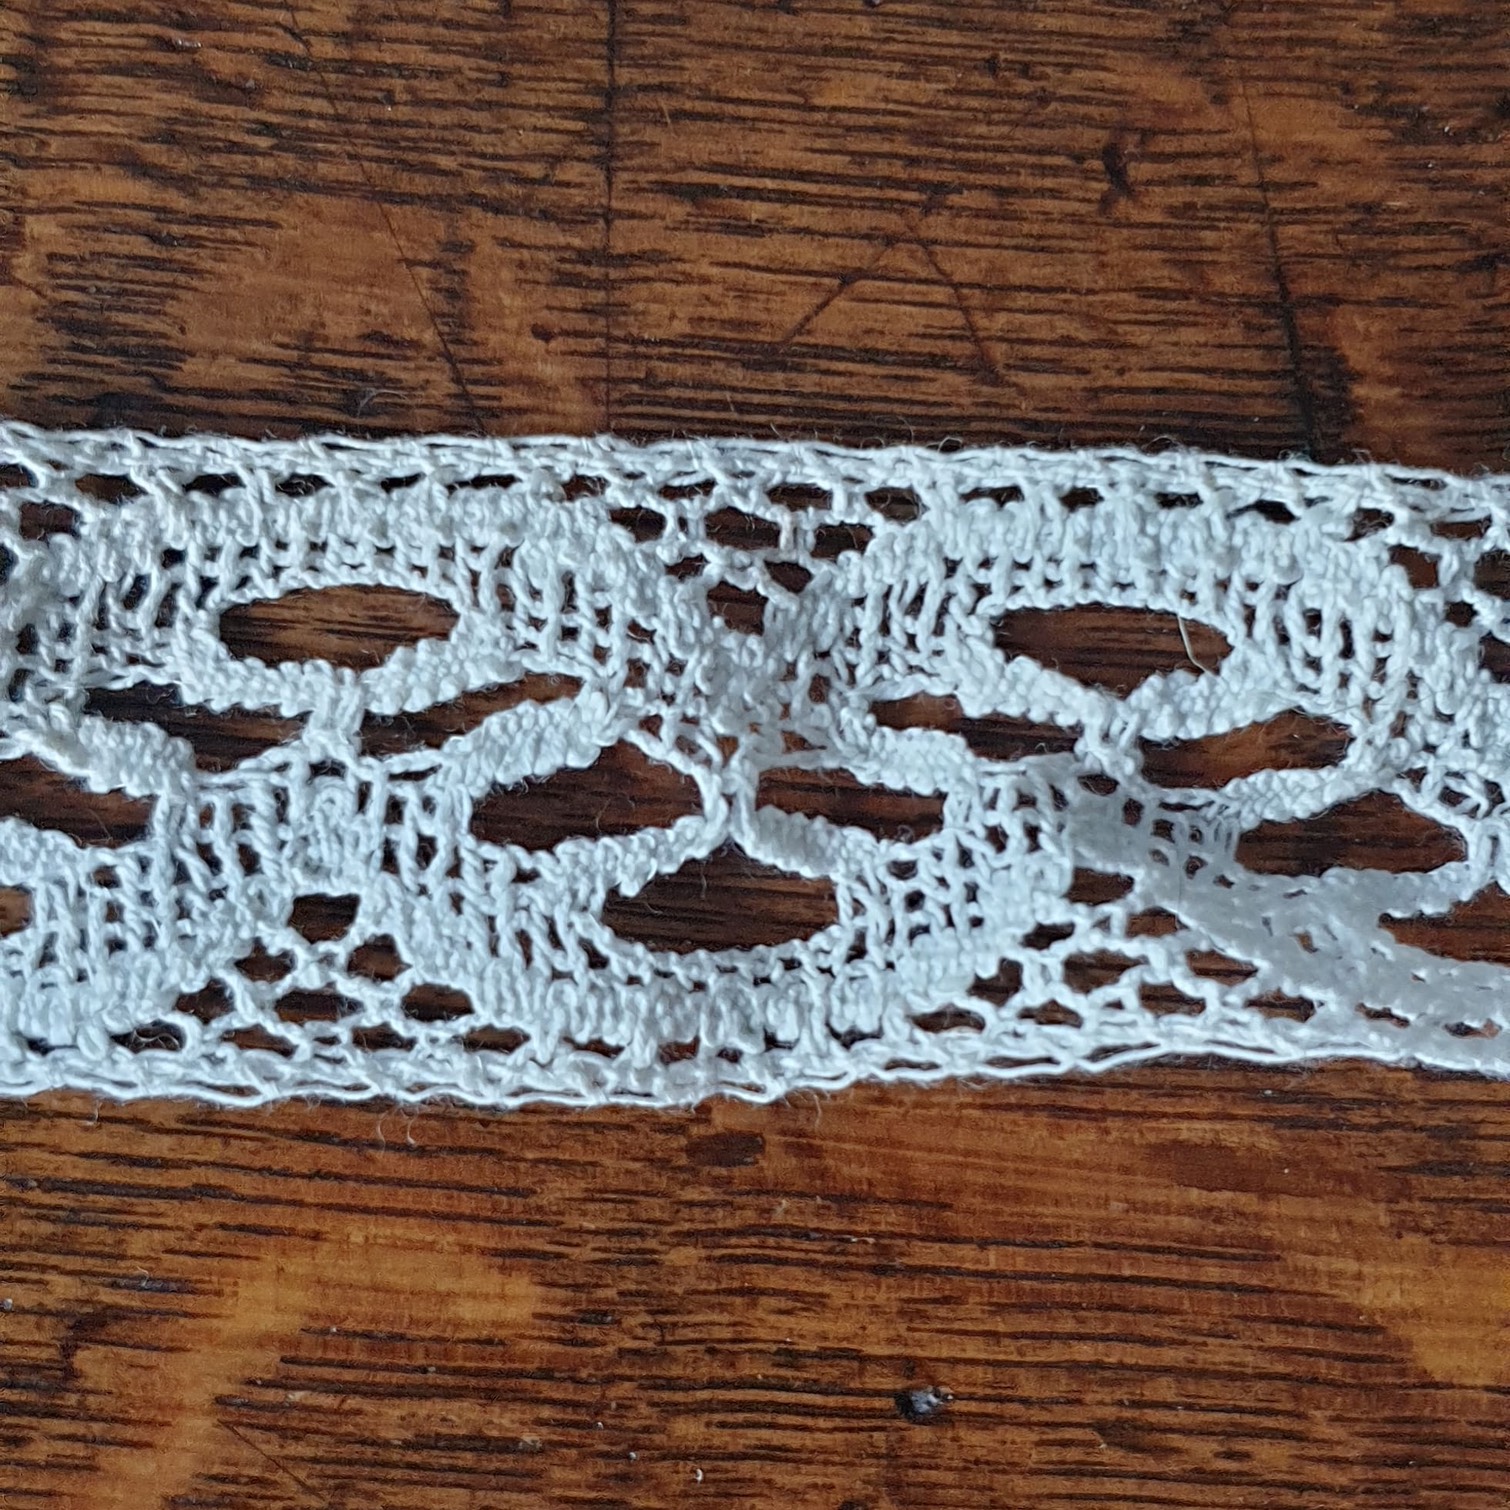 Lacemaking in Chicheley